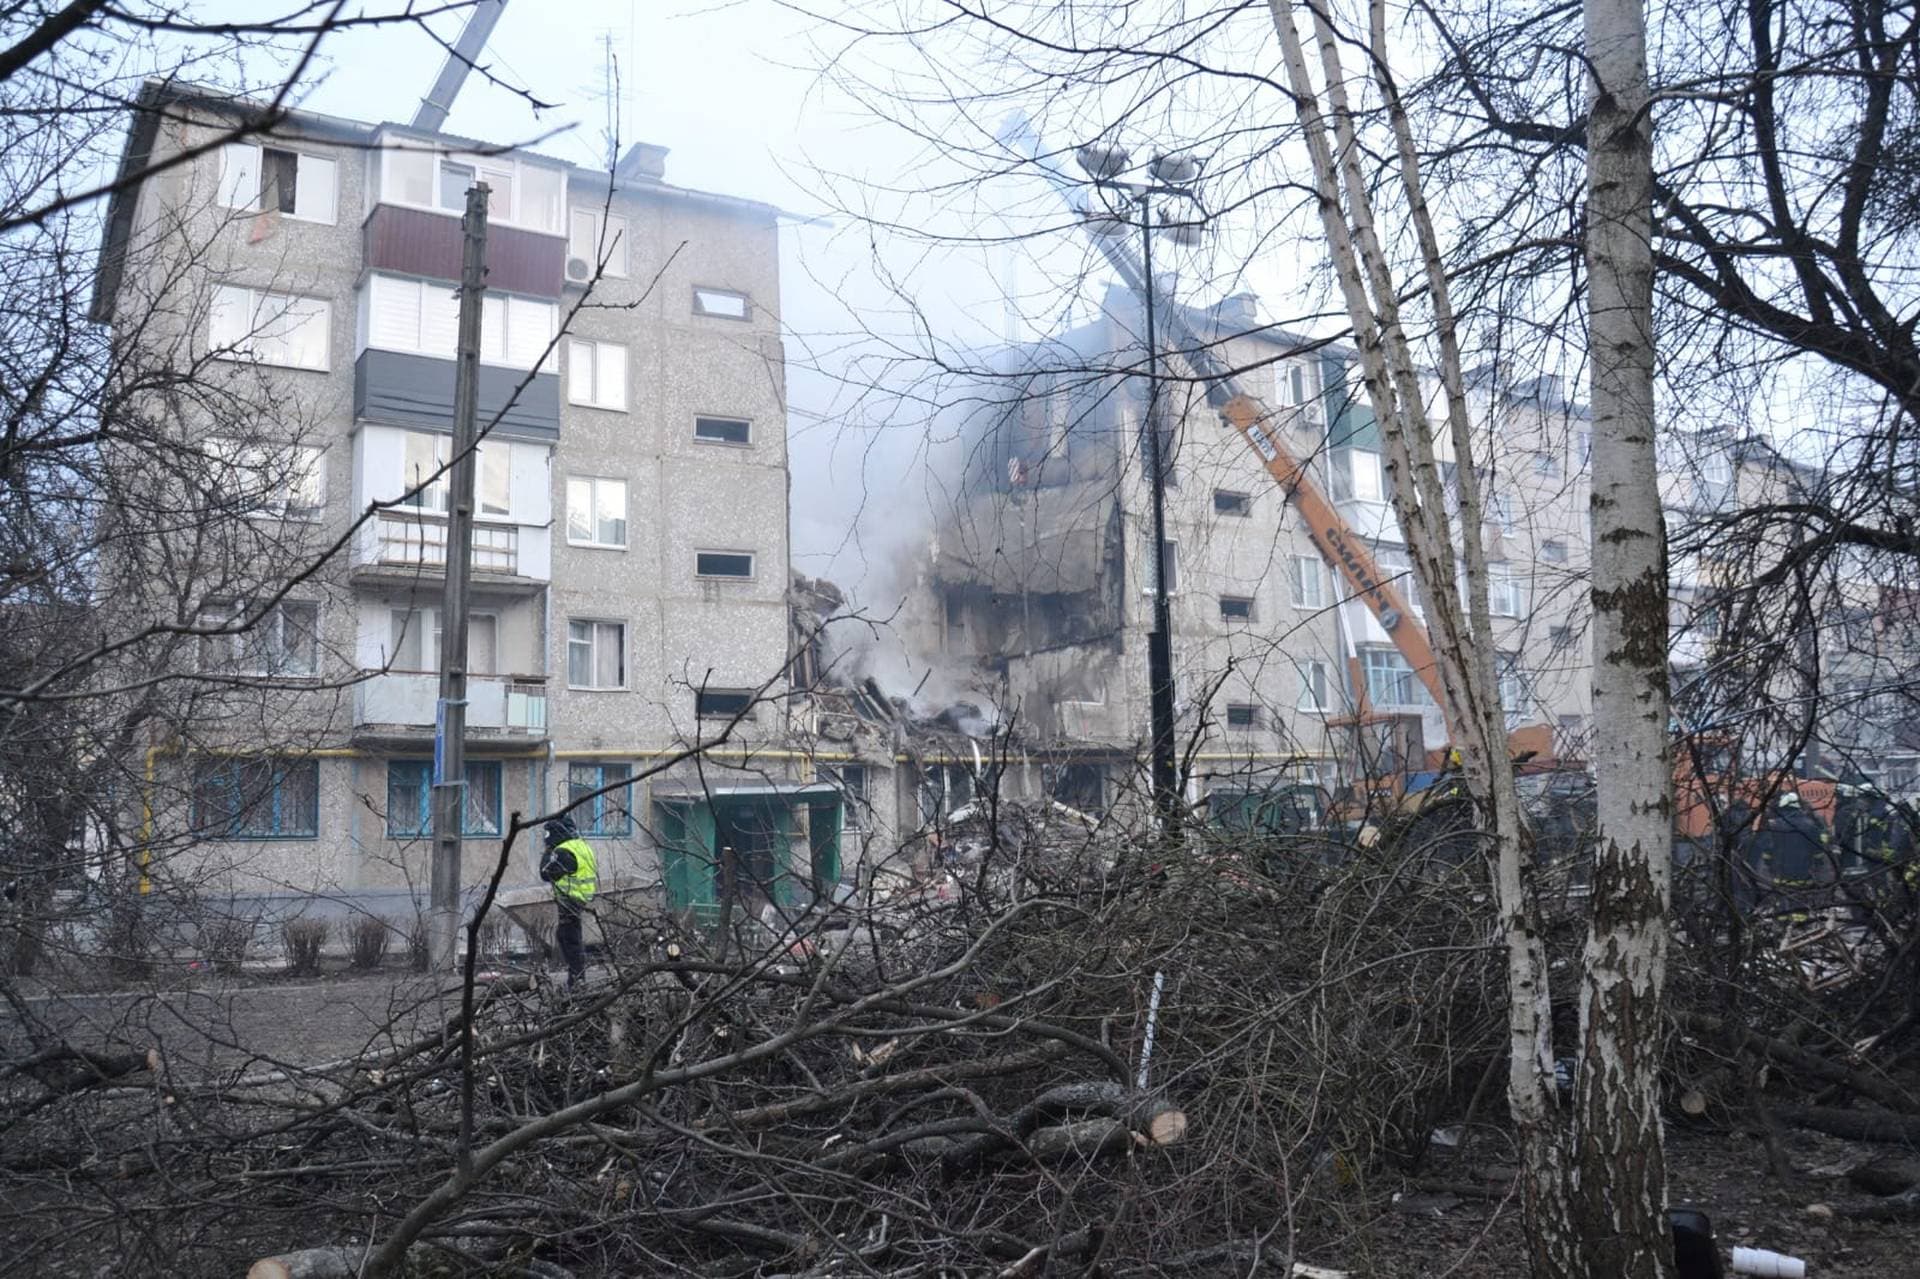 The aftermath of the Russian attack on an apartment building in Sumy on 13 March